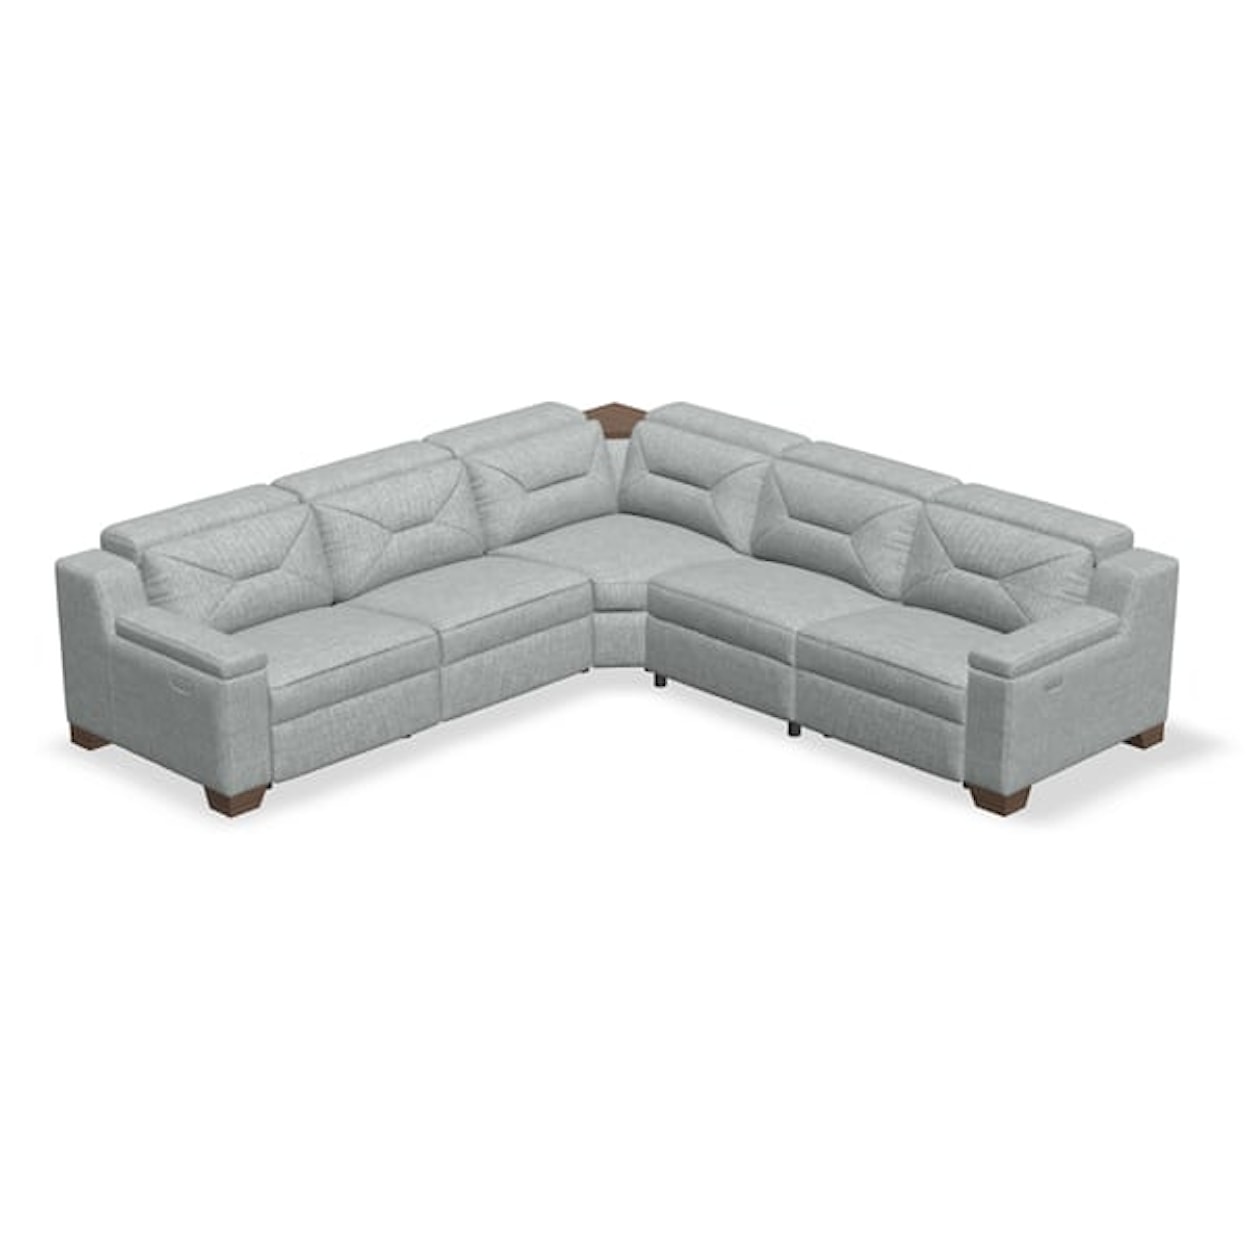 Palliser Apex 5-Seat L-Sectional with Storage Console